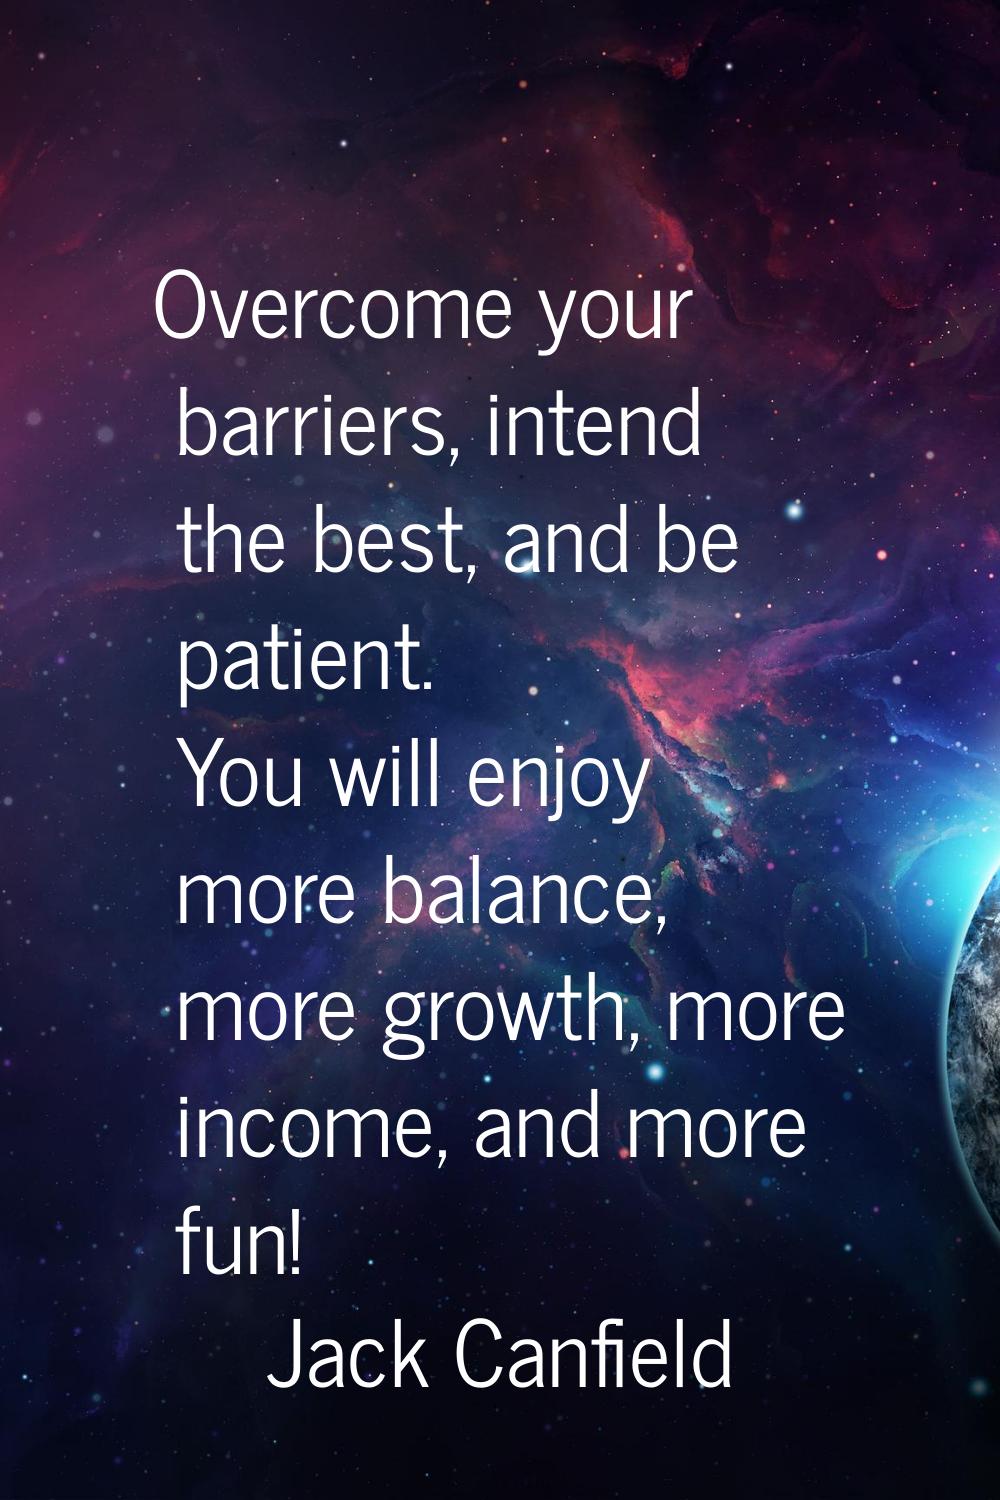 Overcome your barriers, intend the best, and be patient. You will enjoy more balance, more growth, 